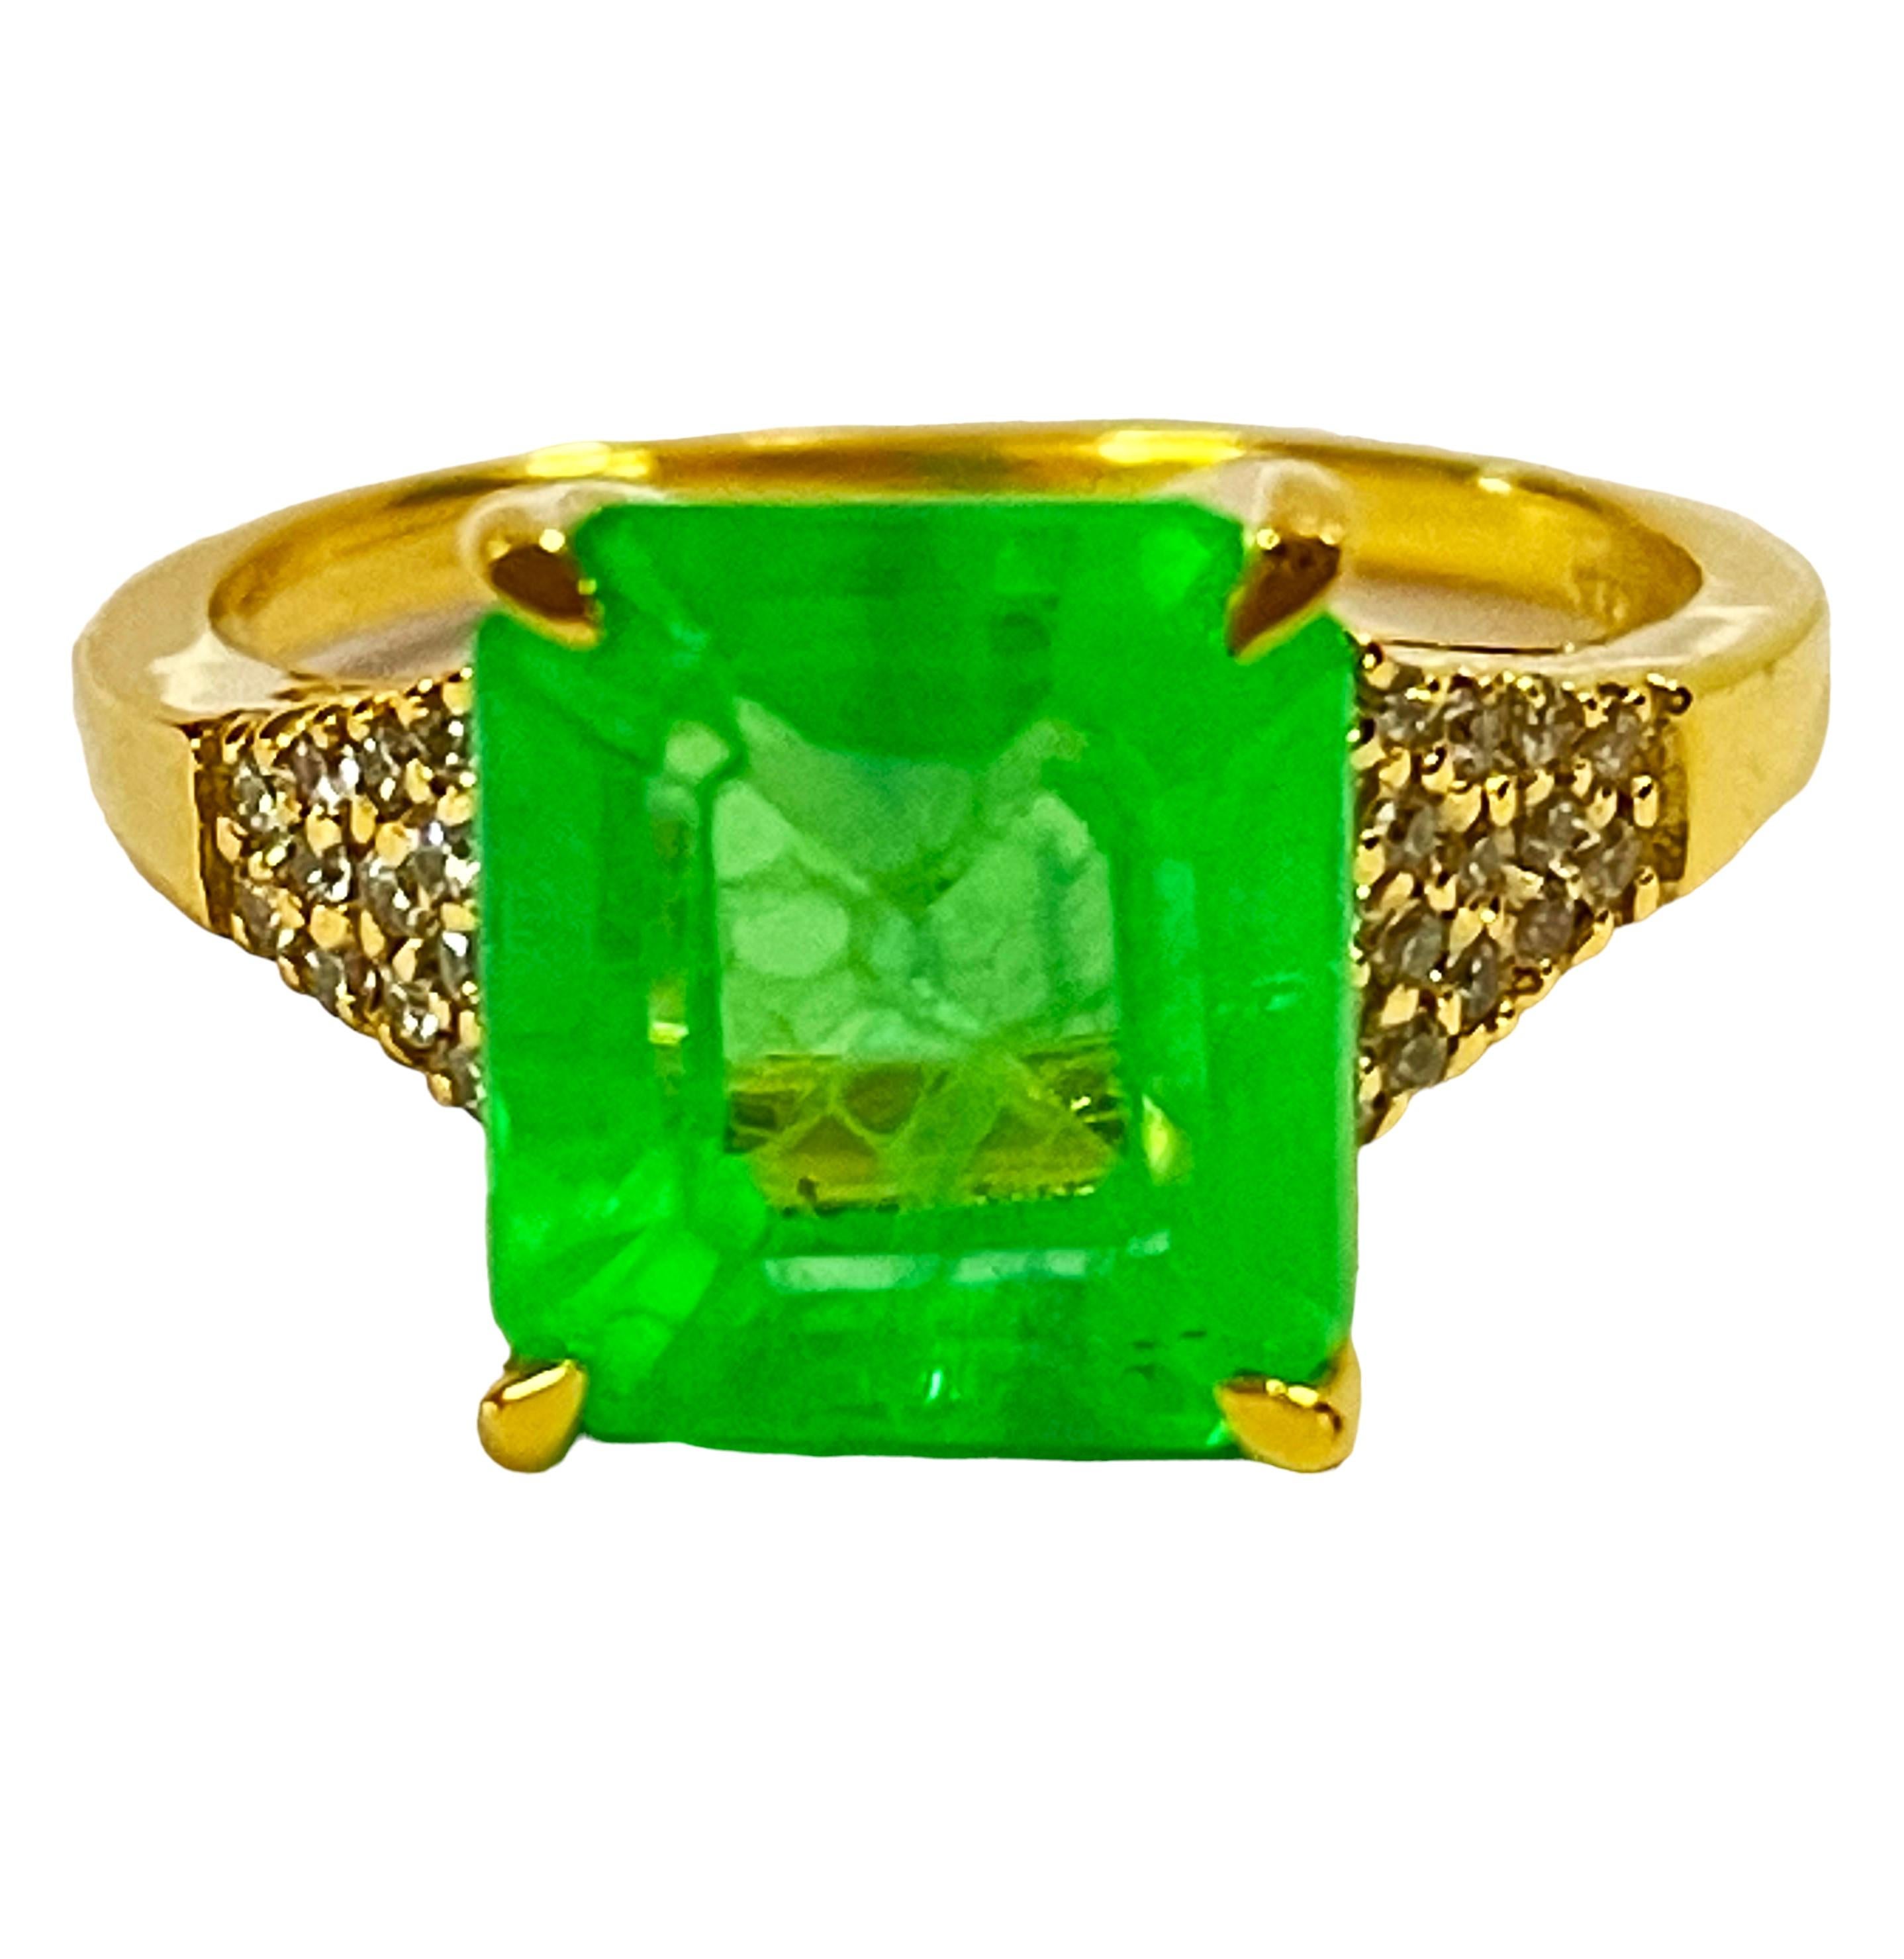 What beautiful color this ring is!  The setting is Yellow Gold Plated.  The ring is a size 6.75.   The stone is from Africa and is just exquisite.  It is a highly rated stone.  It is a cushion cut stone and is 5.40 Cts   The main stone is 9.7 x 8.7